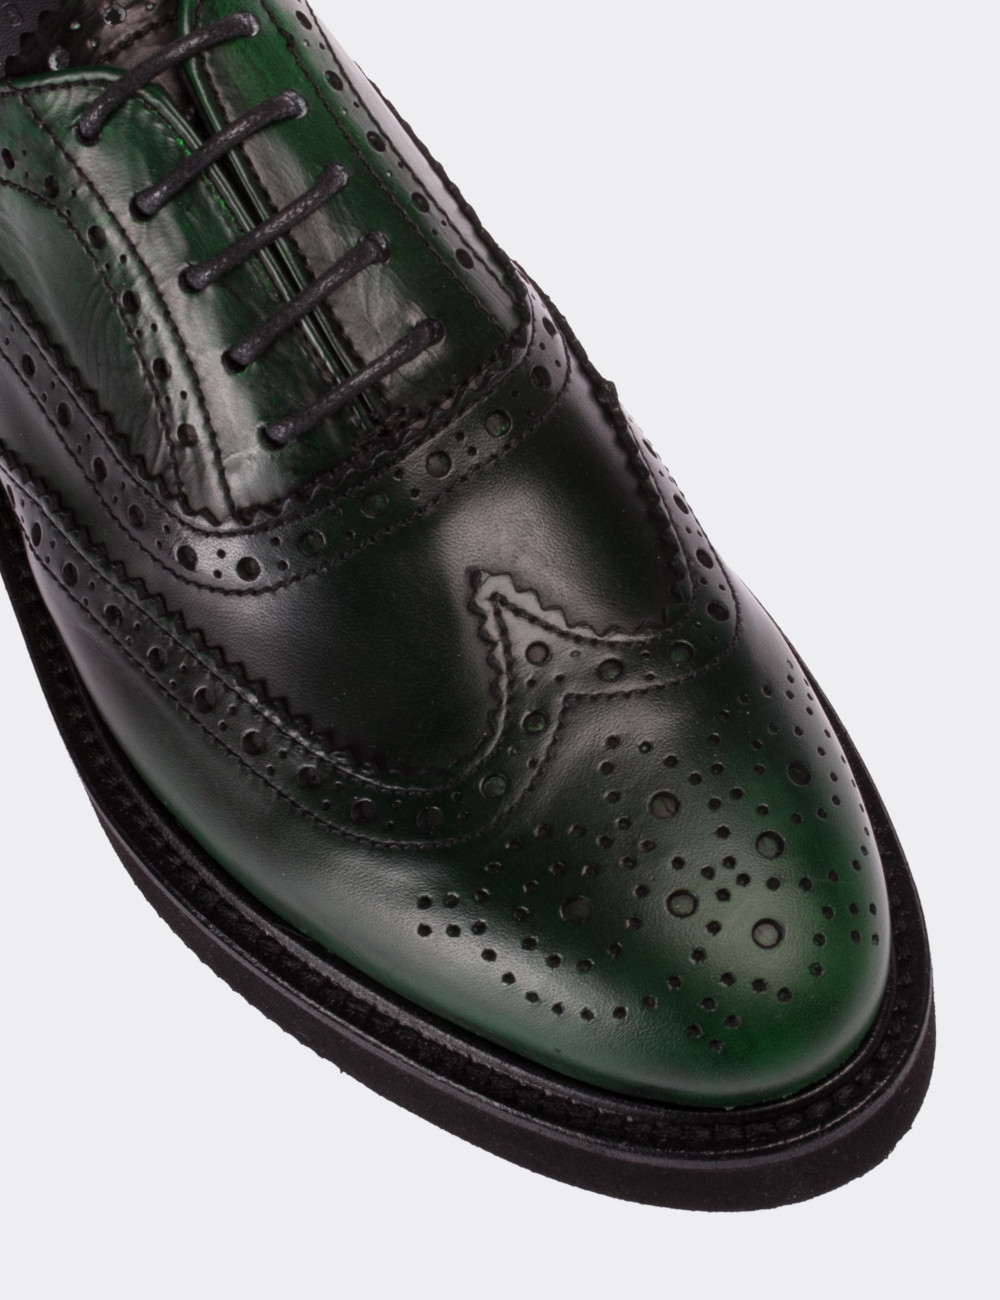 Green  Leather Lace-up Shoes - 01418ZYSLE04